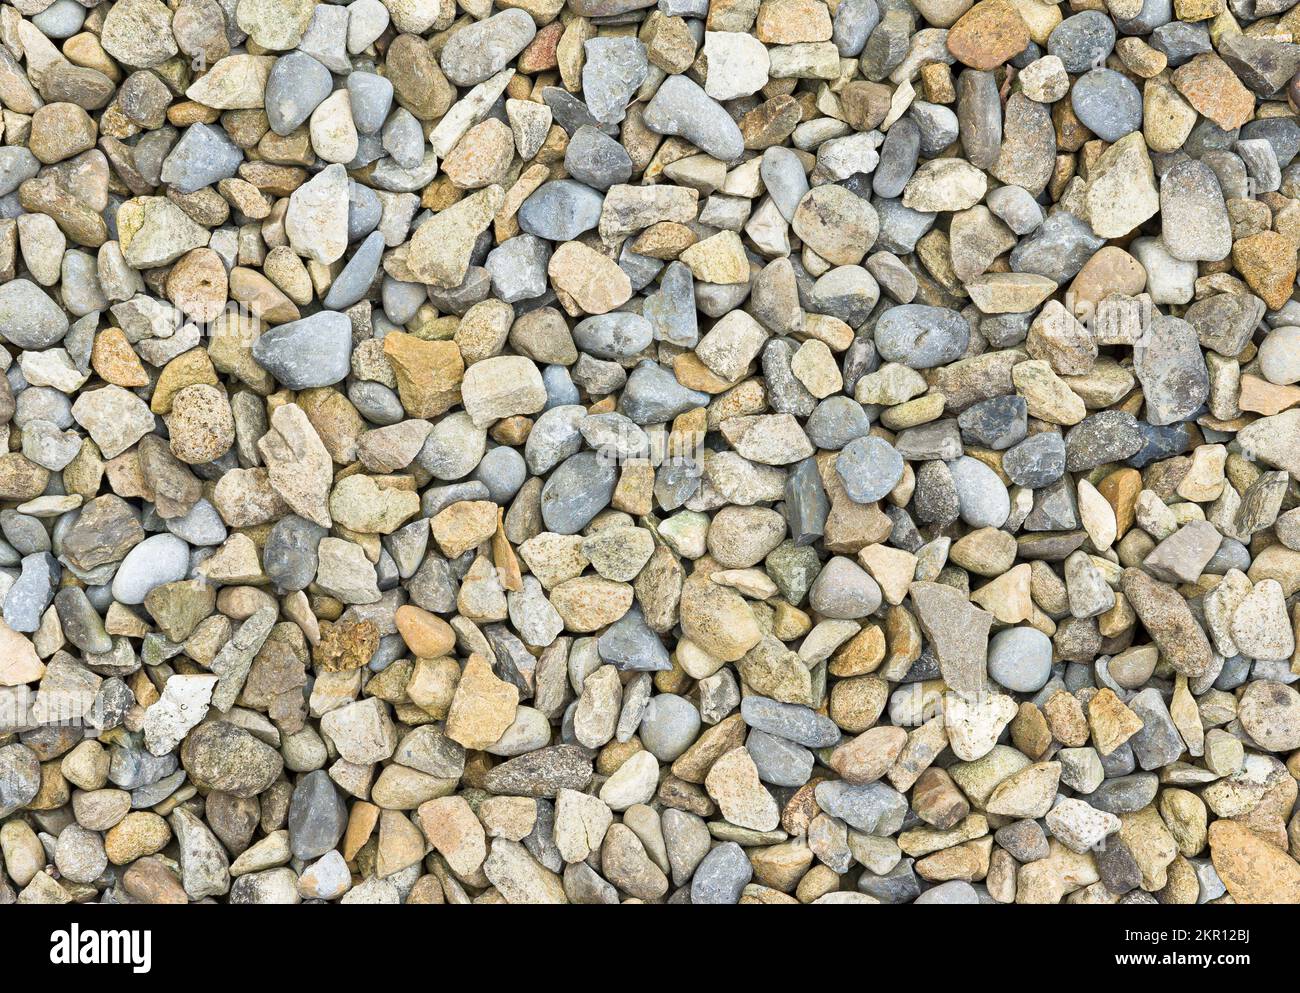 Gravel pebble background. Close-up of gravel pattern on a driveway Stock Photo